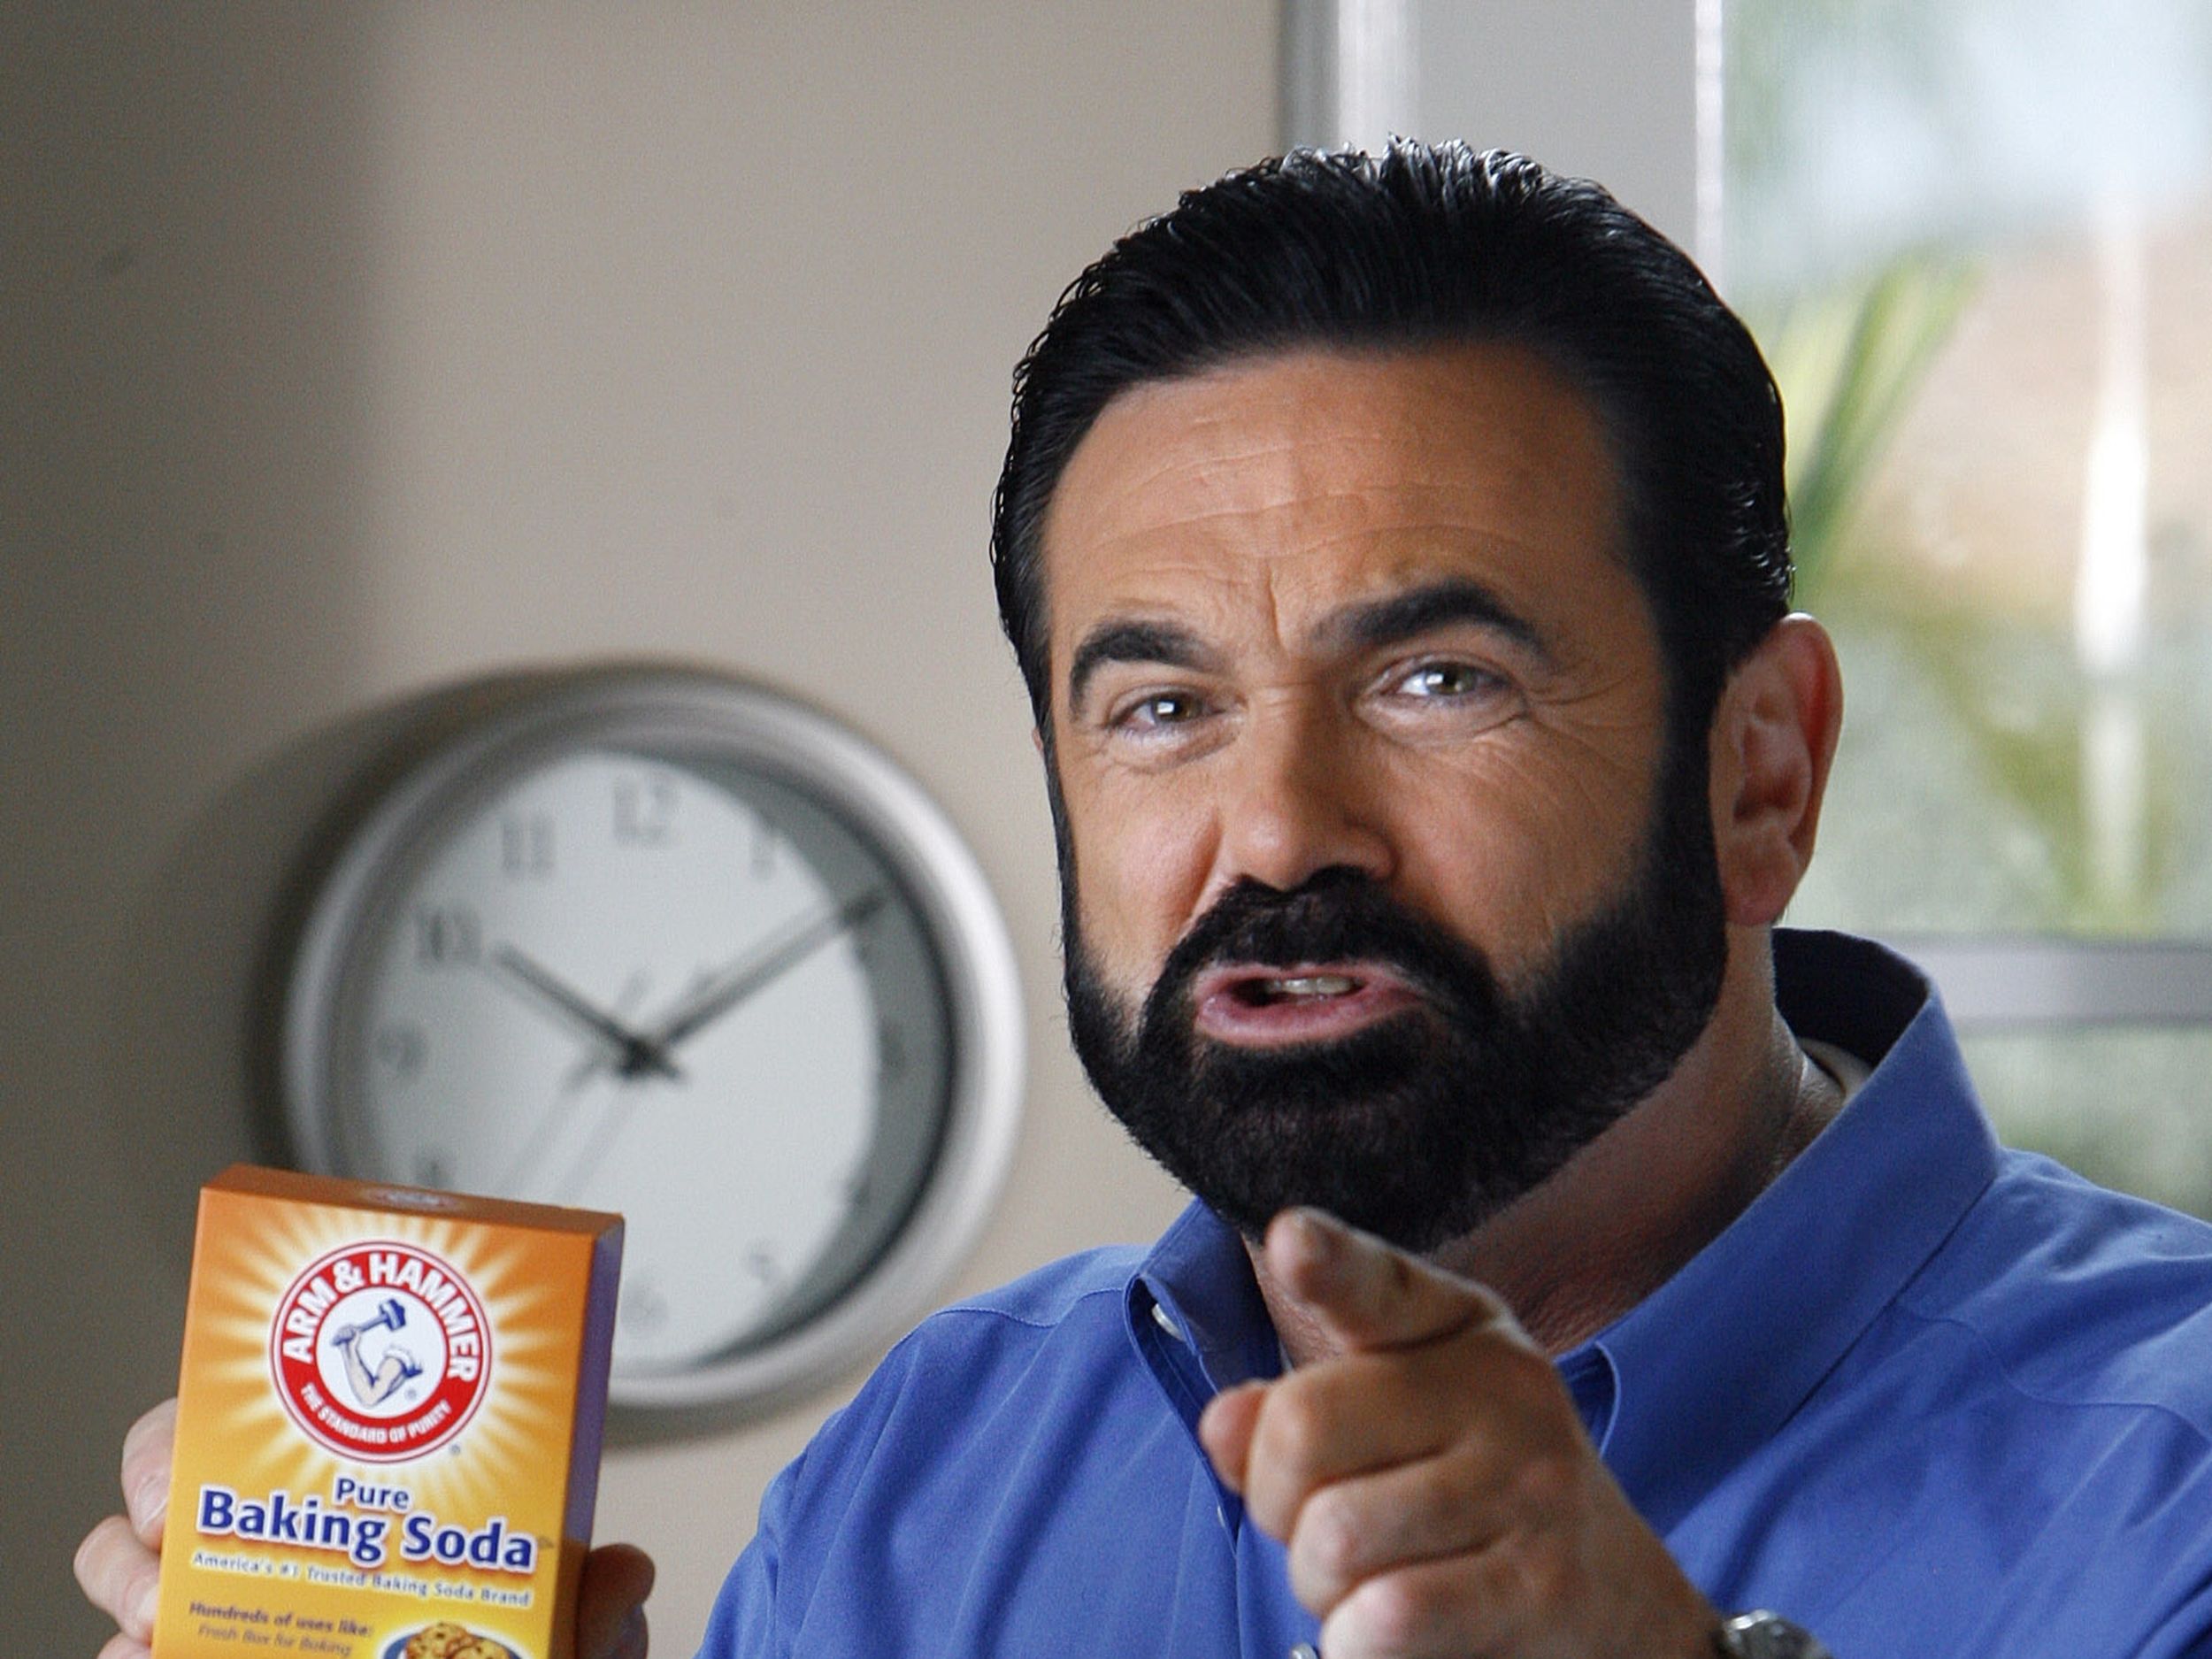 Billy Mays' final commercials before death, for Mighty products